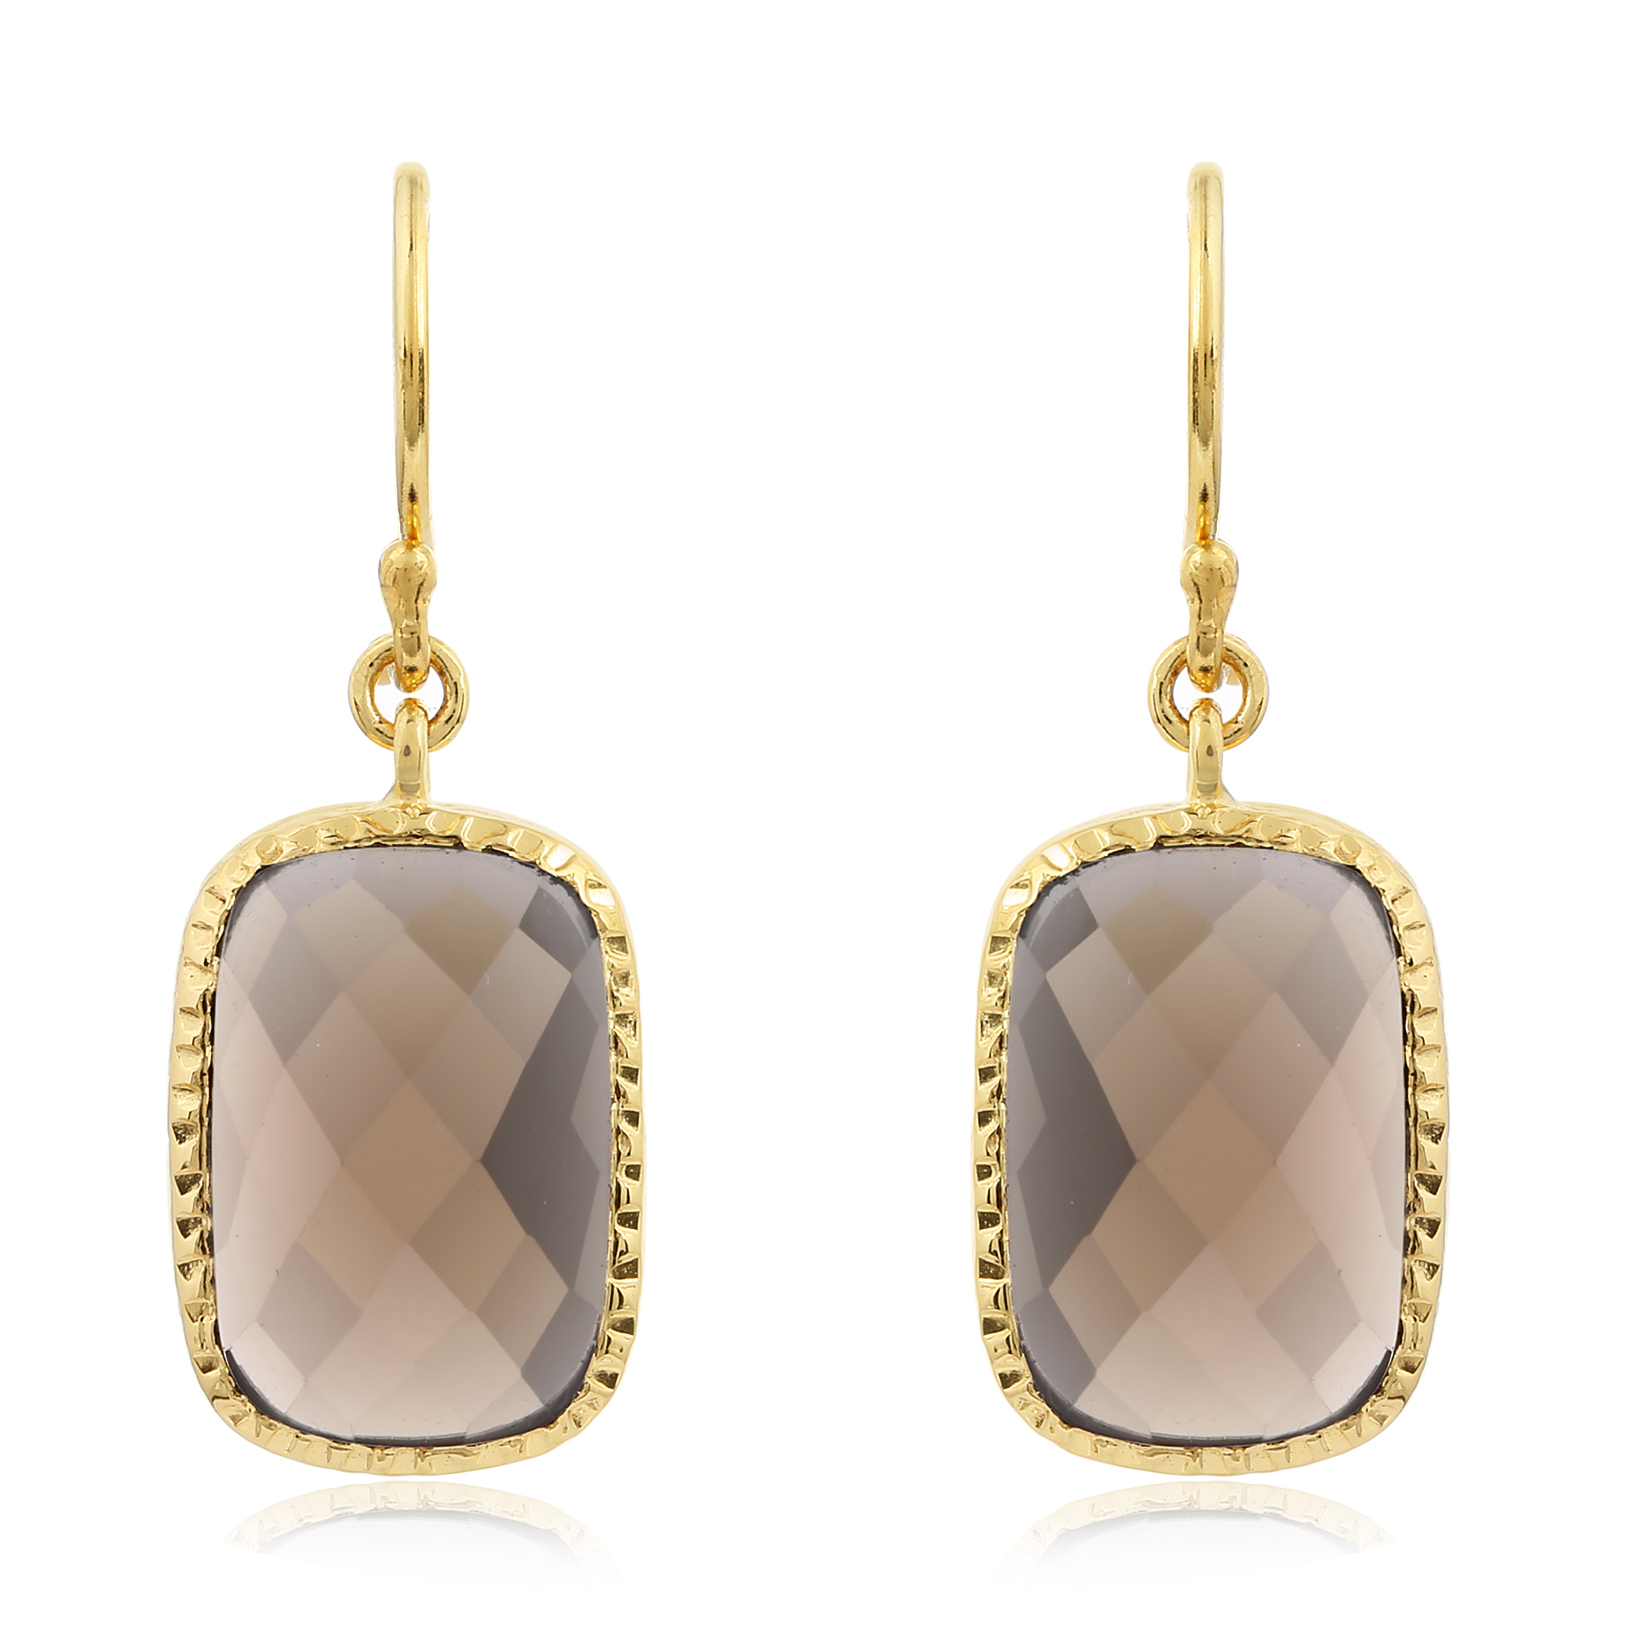 Genuine Smokey Quartz Earring In Gold Over Sterling Silver